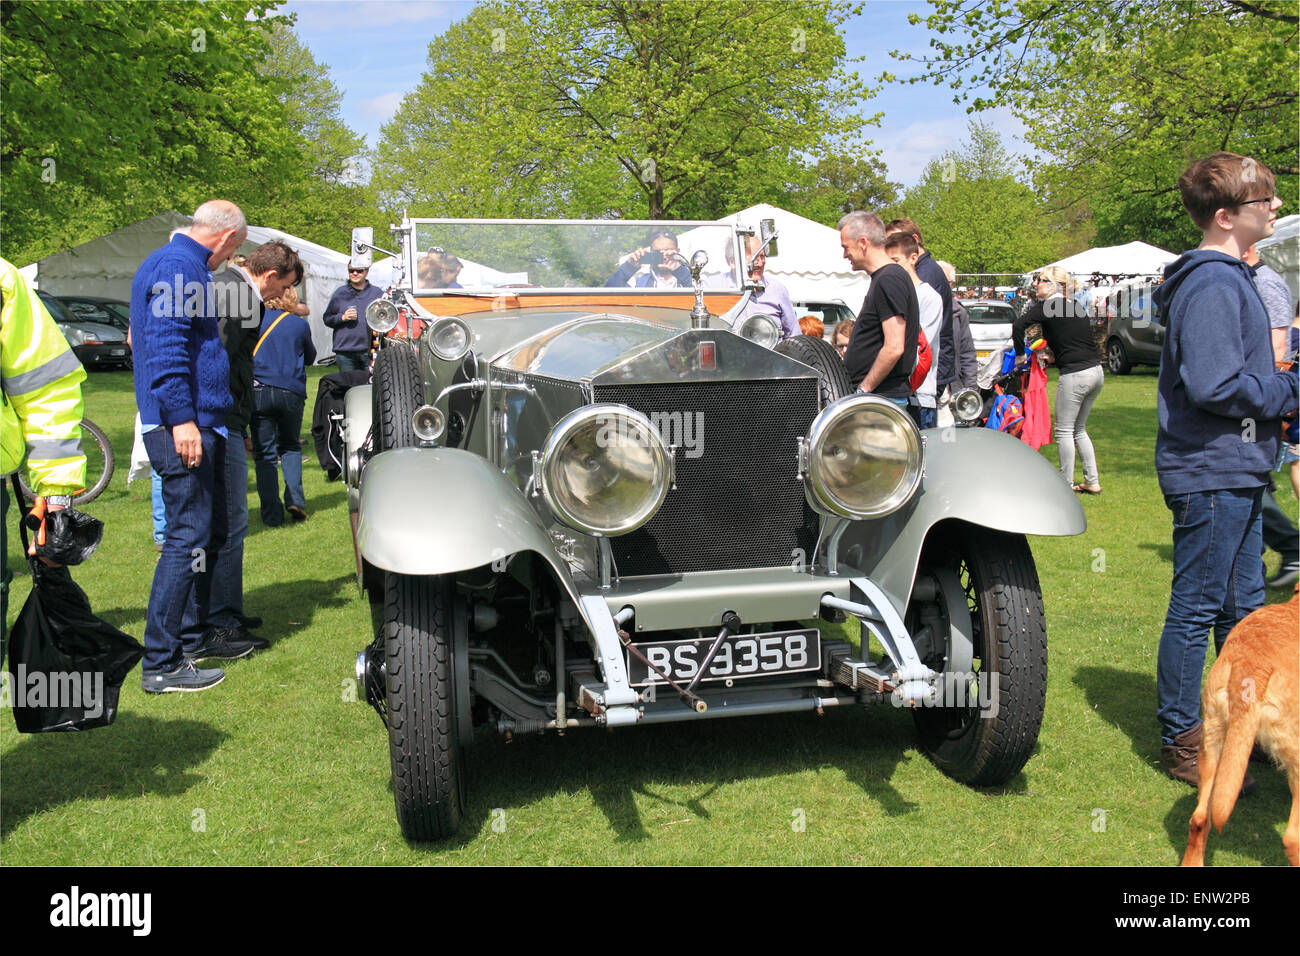 1924 Rolls-Royce Silver Ghost Tourer. Chestnut Sunday, 10th May 2015. Bushy Park, Hampton Court, London Borough of Richmond, England, Great Britain, United Kingdom, UK, Europe. Vintage and classic vehicle parade and displays with fairground attractions and military reenactments. Credit:  Ian Bottle / Alamy Live News Stock Photo